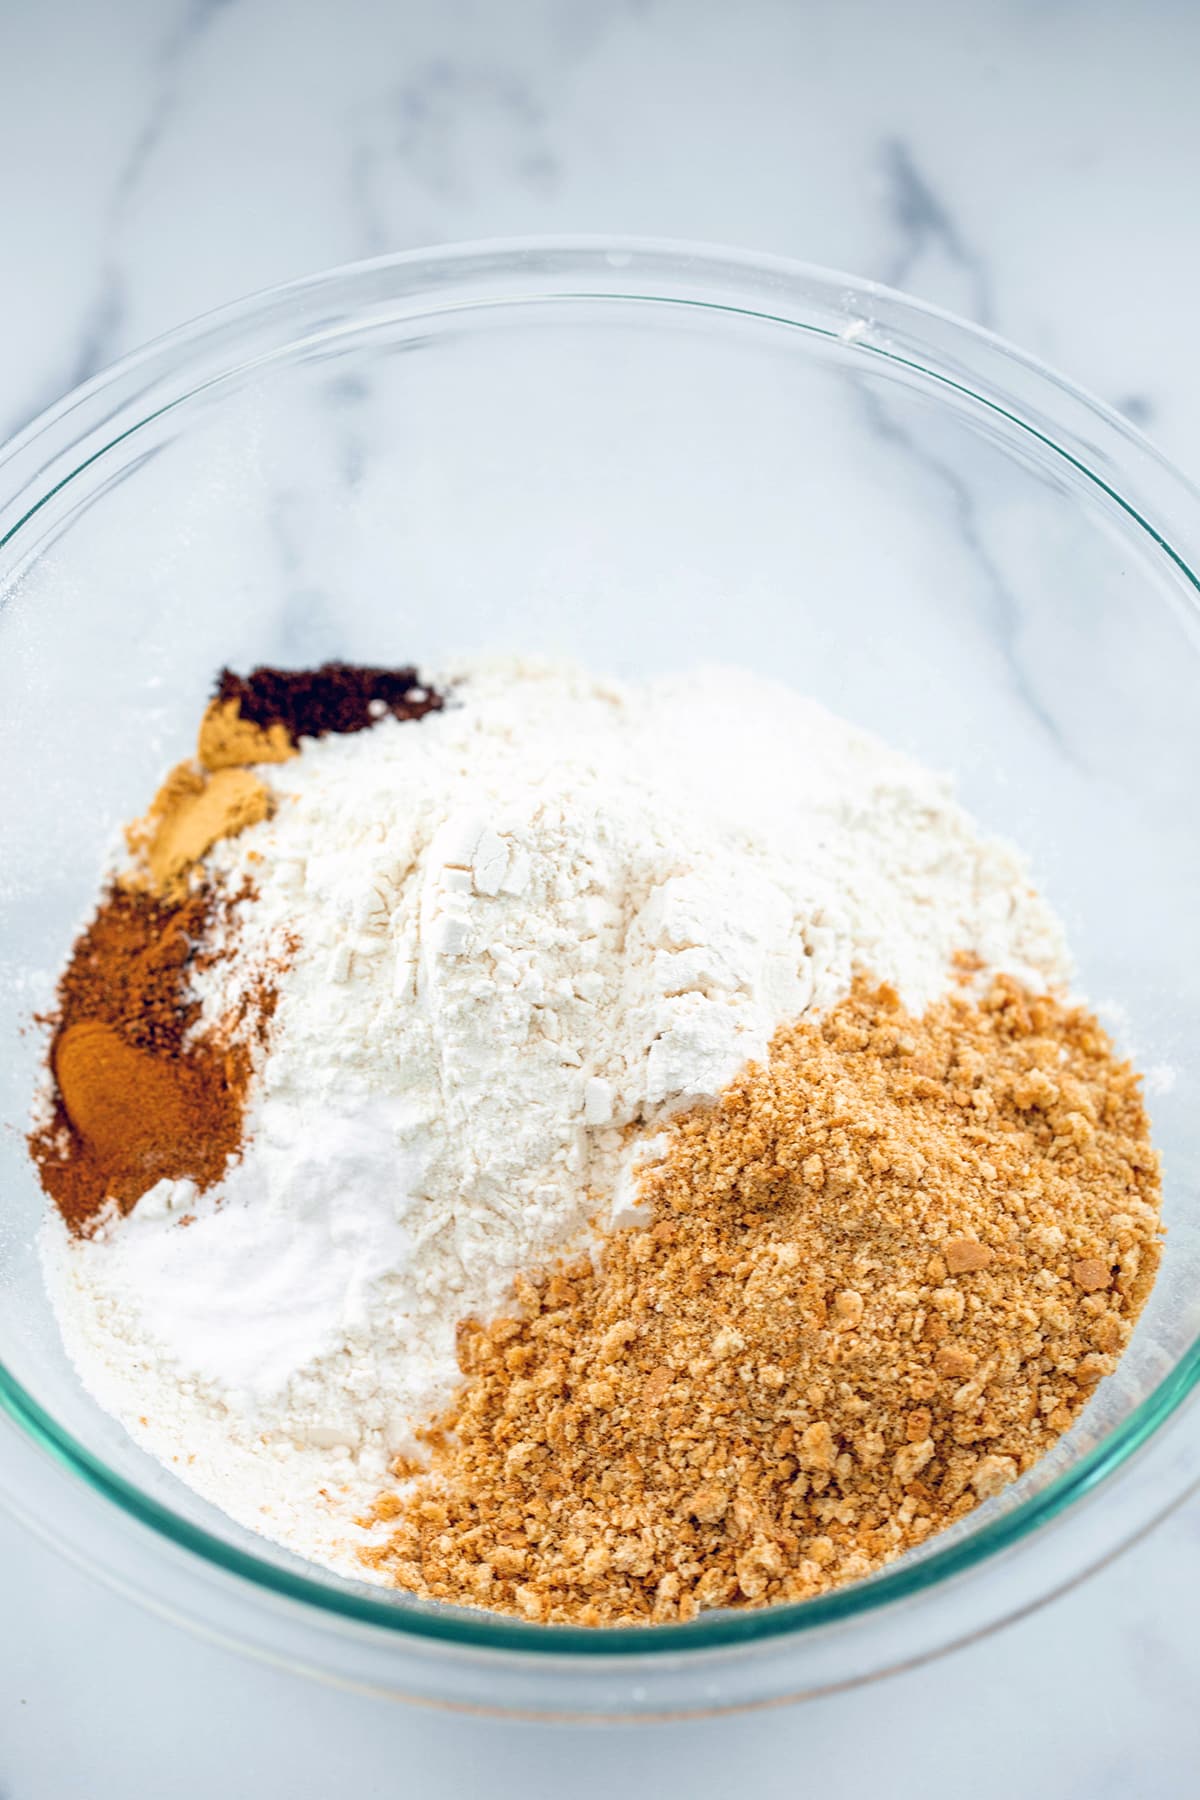 Flour, graham cracker crumbs, and spices in mixing bowl.